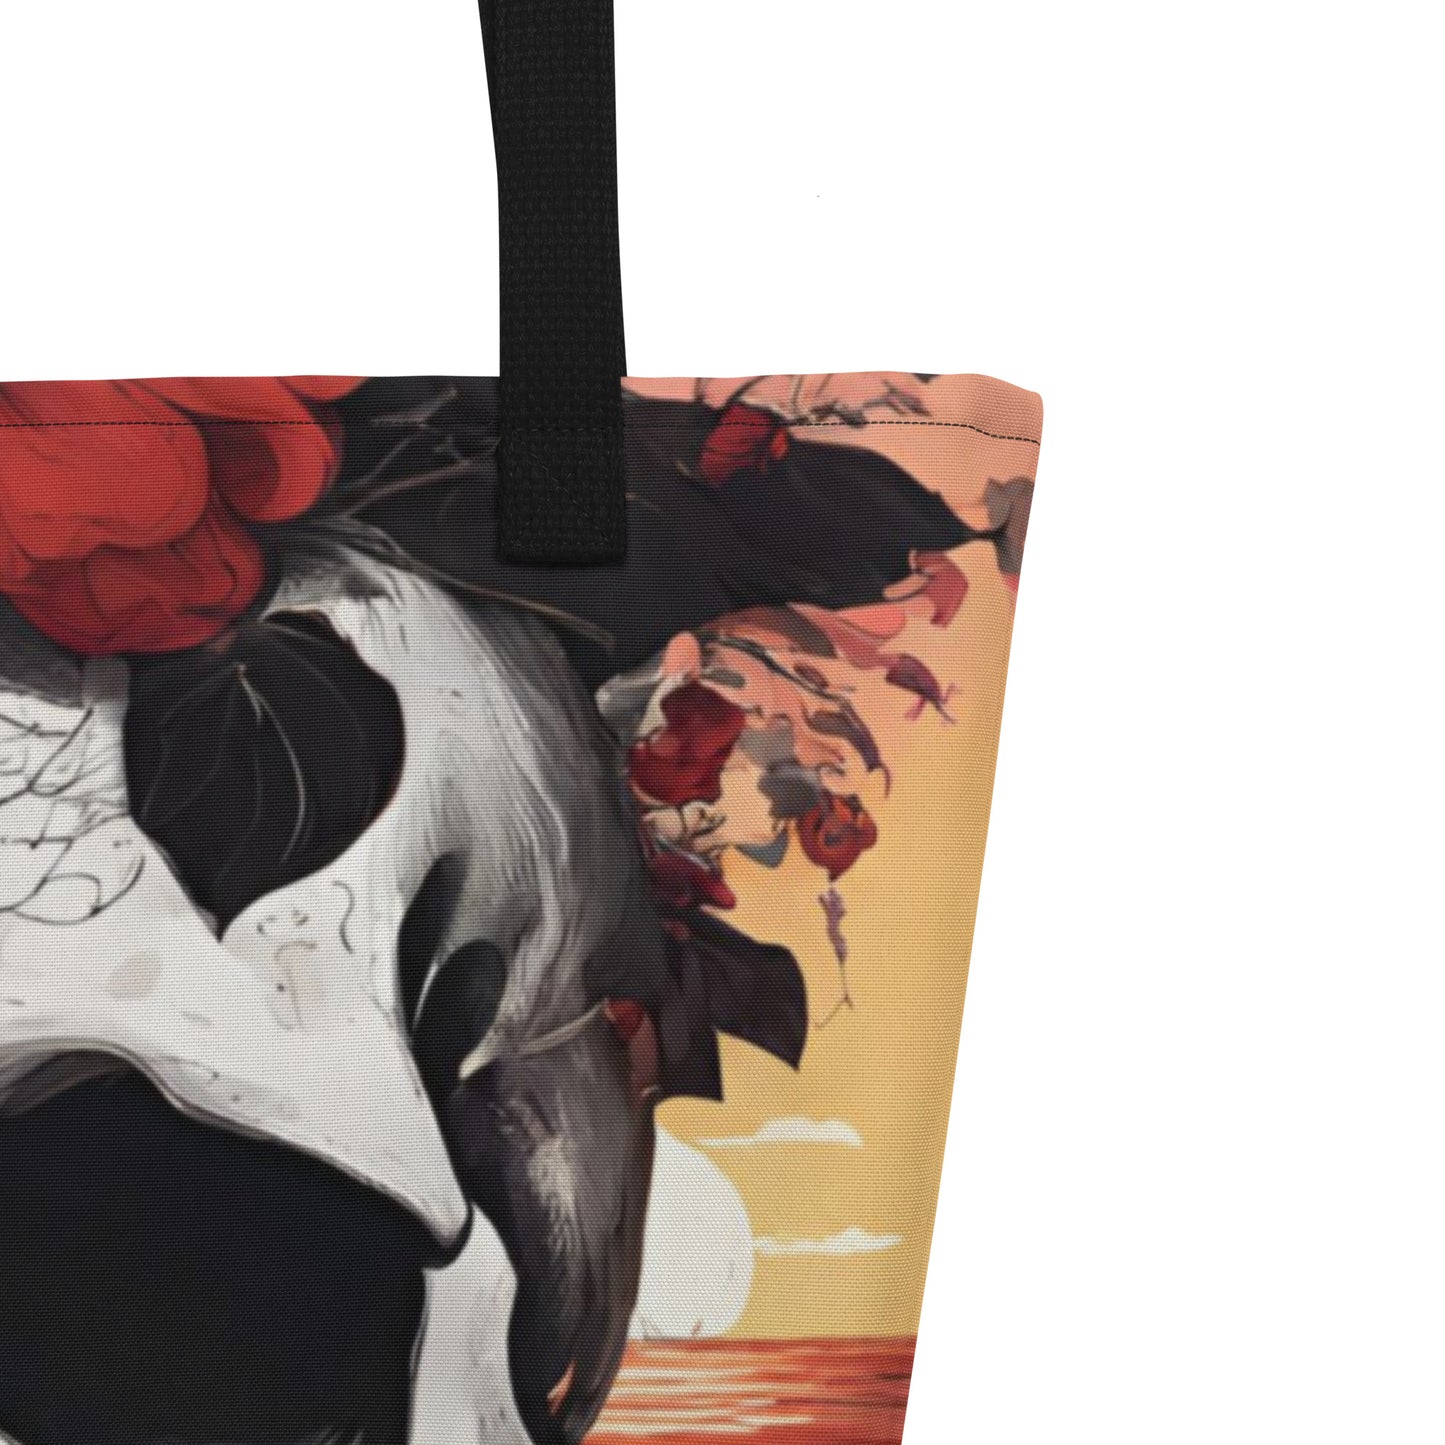 TROPICAL RED FLOWER SKULL LARGE BEACH TOTE